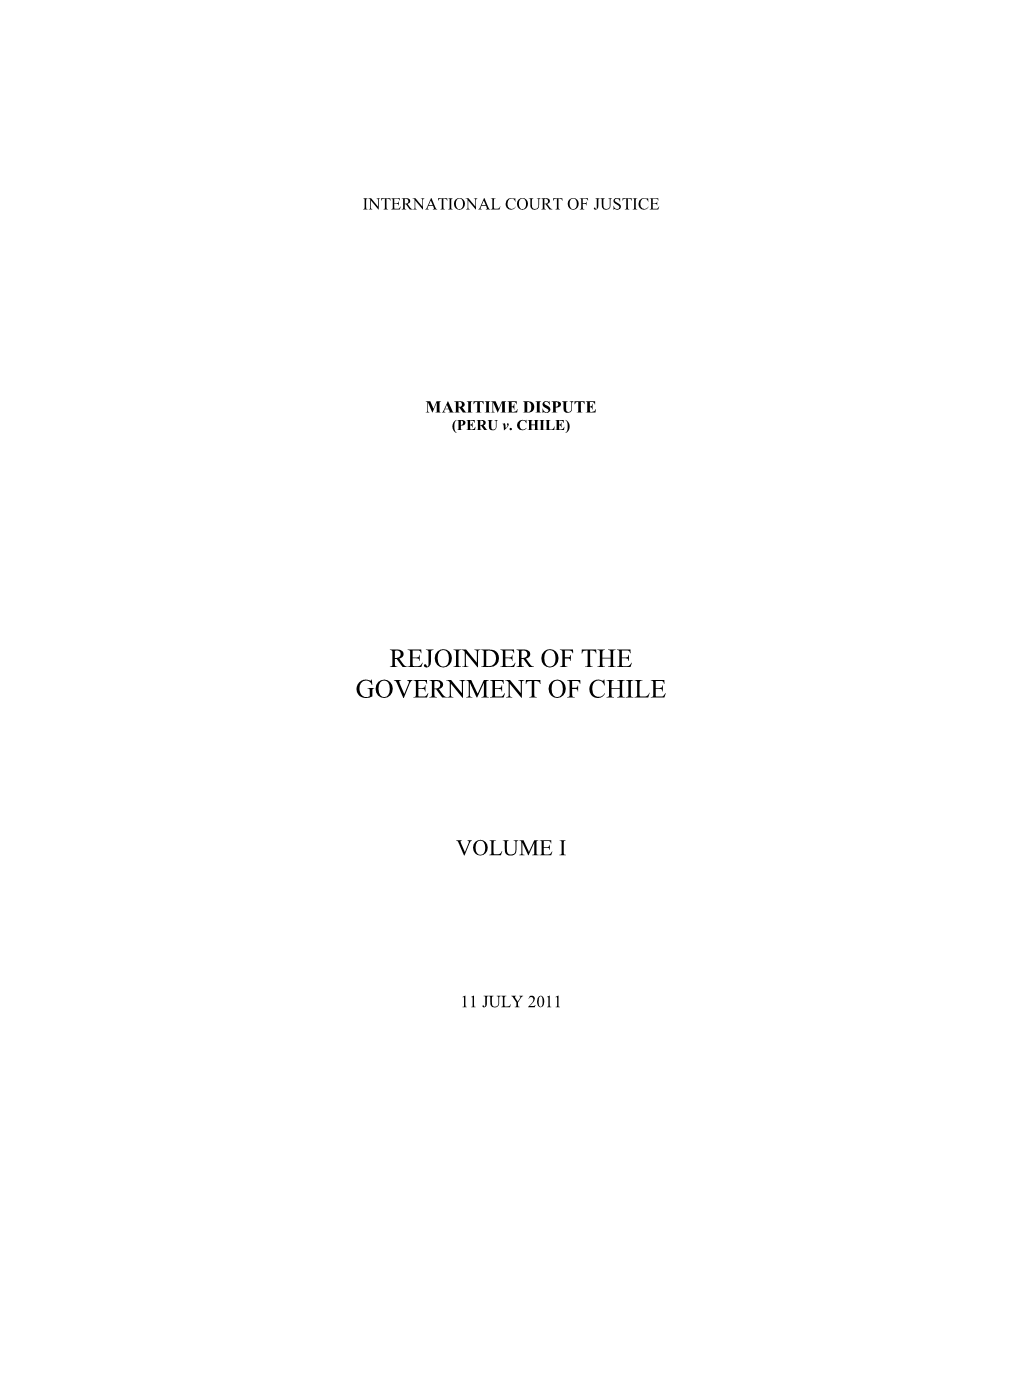 Rejoinder of the Government of Chile